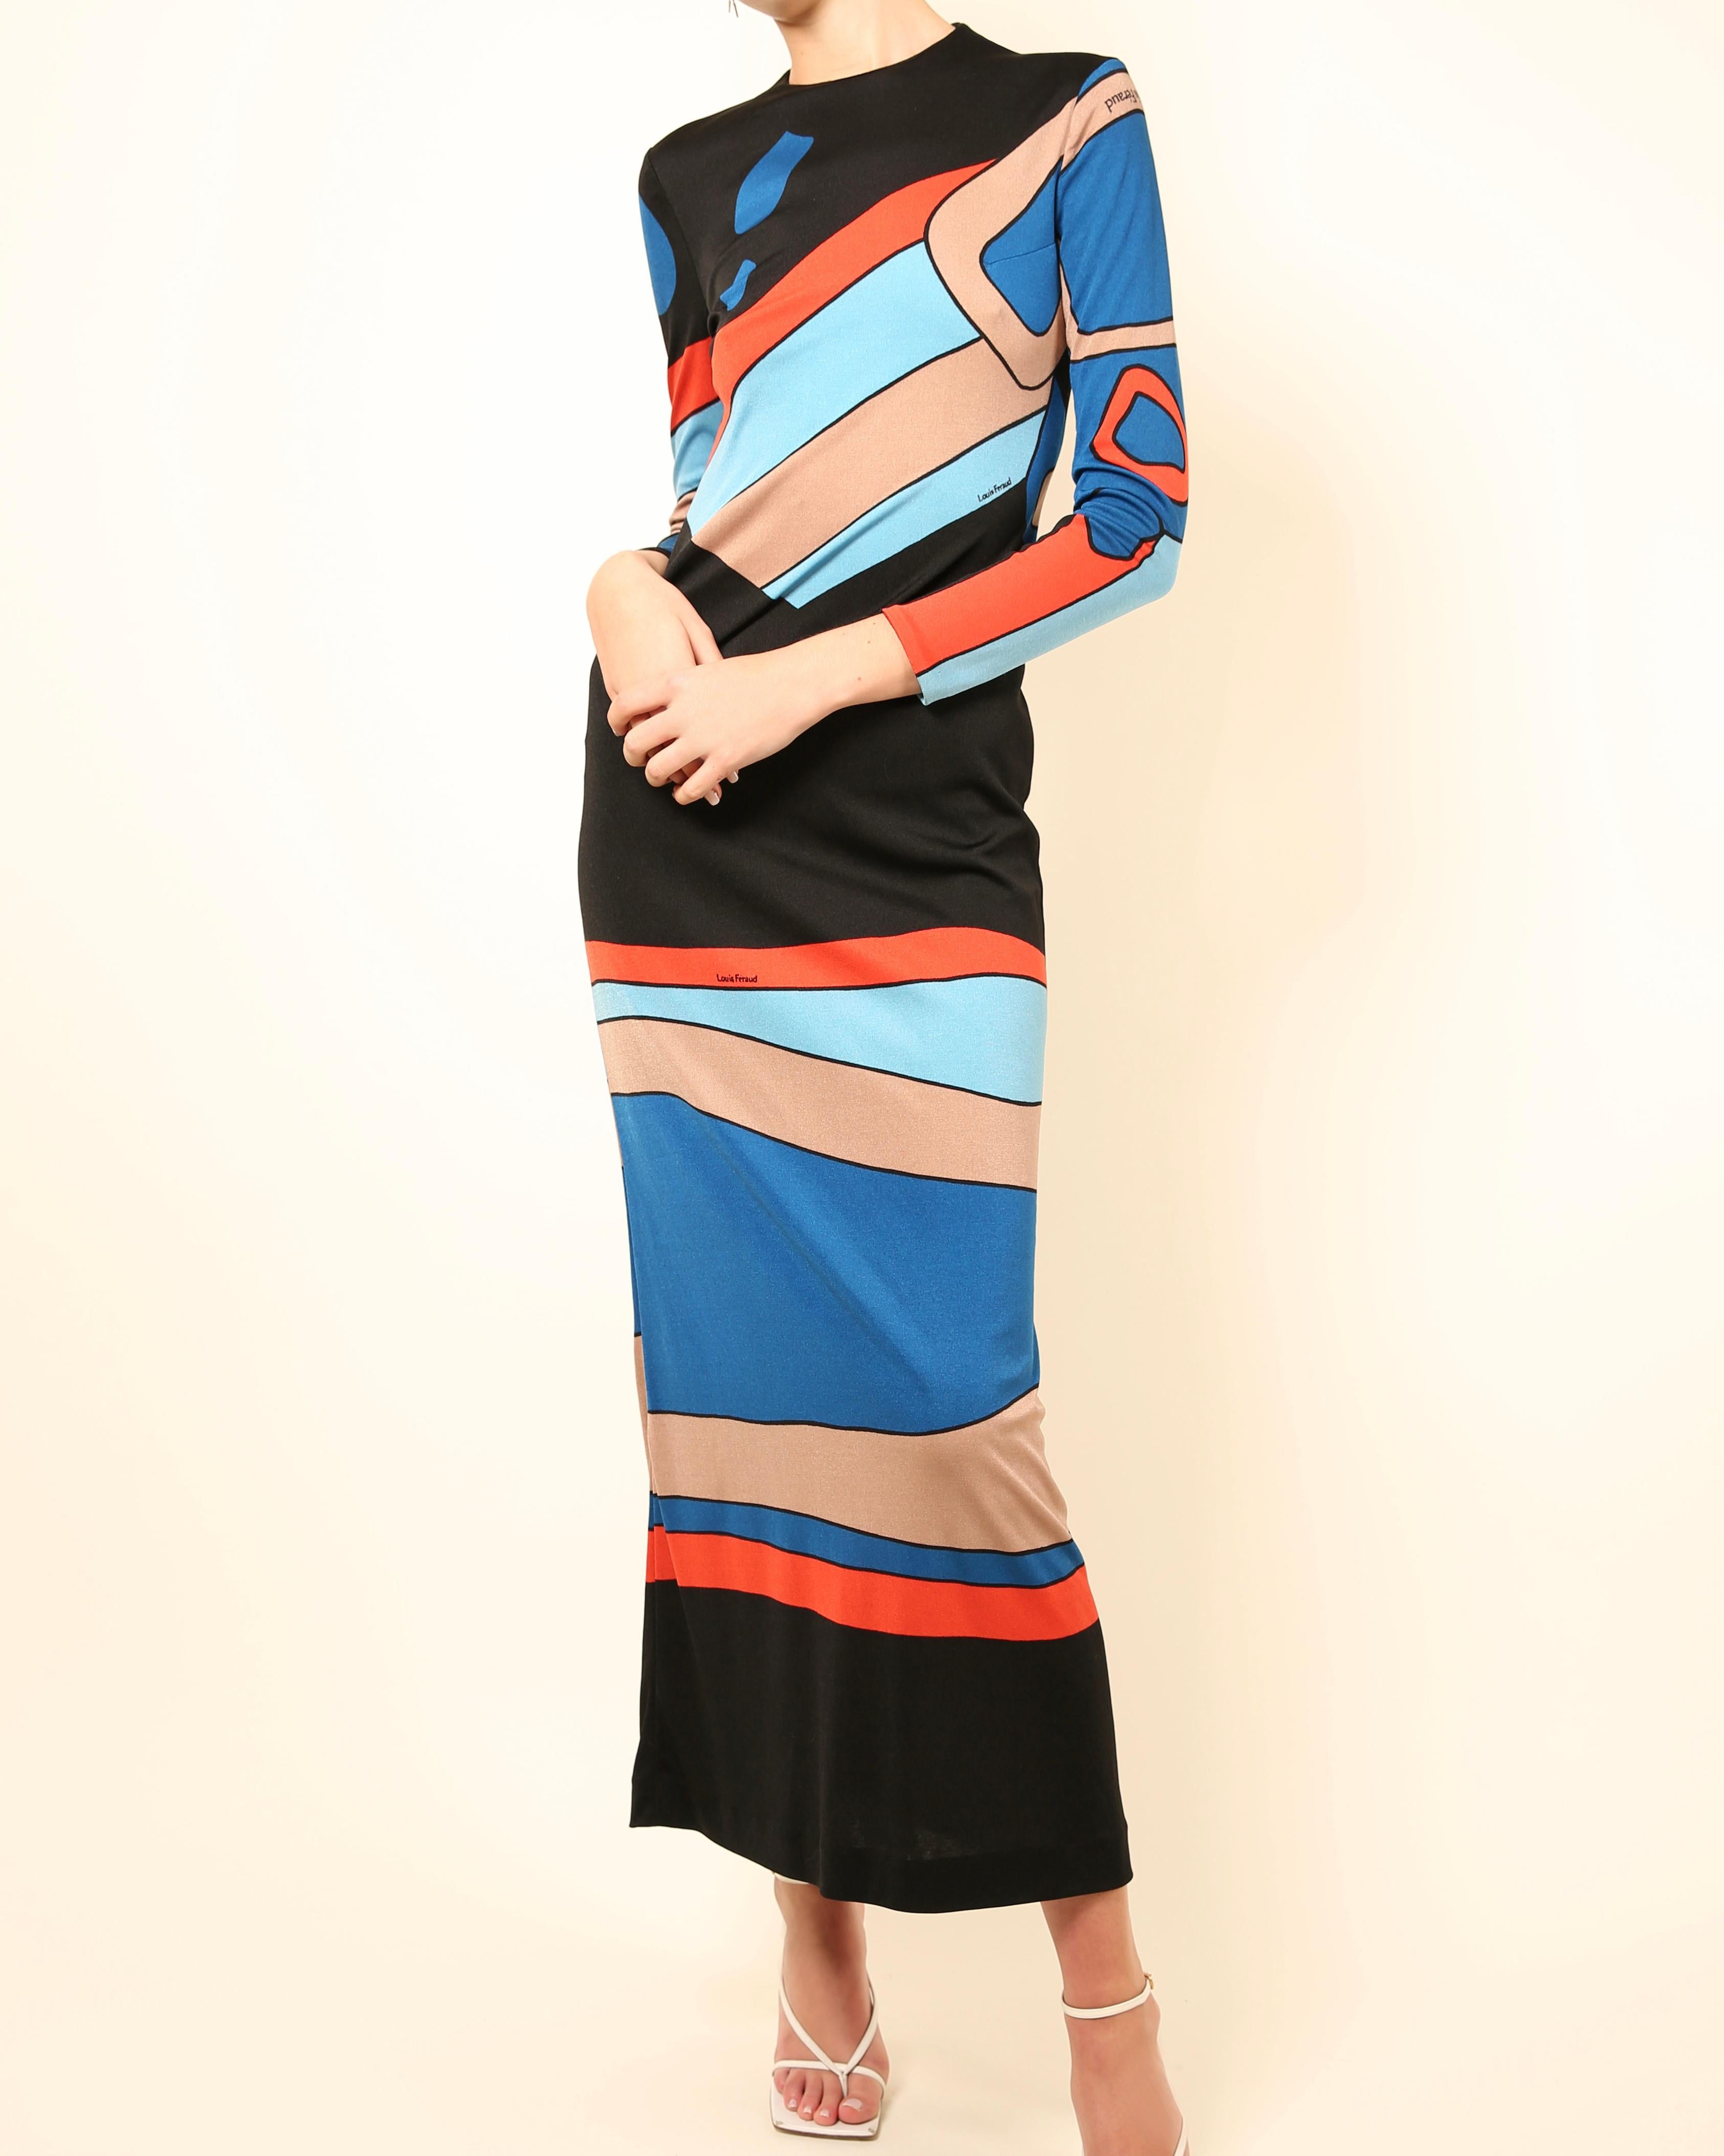 LOVE LALI Vintage

Louis Feraud Paris long vintage dress
Black with blue, red and beige abstract style print 
Long sleeves 
Crew neck
Stretch fabric
Concealed back zip

Size:
FR 38

Composition:
No composition label - stretch fabric with a slight